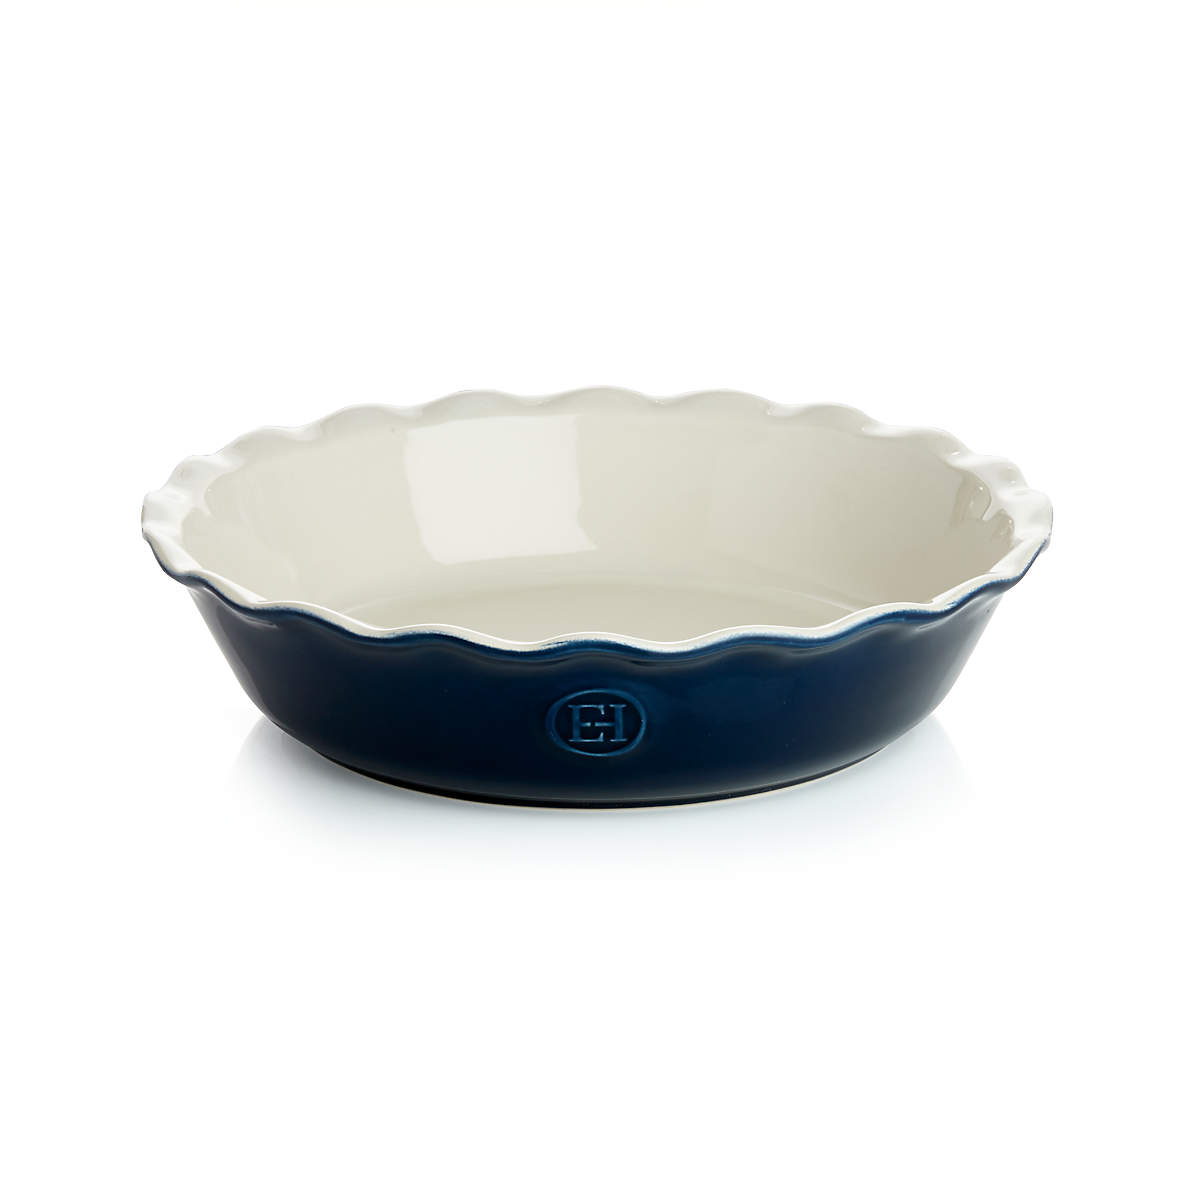 Twilight Blue Emile Henry Made in France HR Modern Classics 9 Inch Pie Dish 